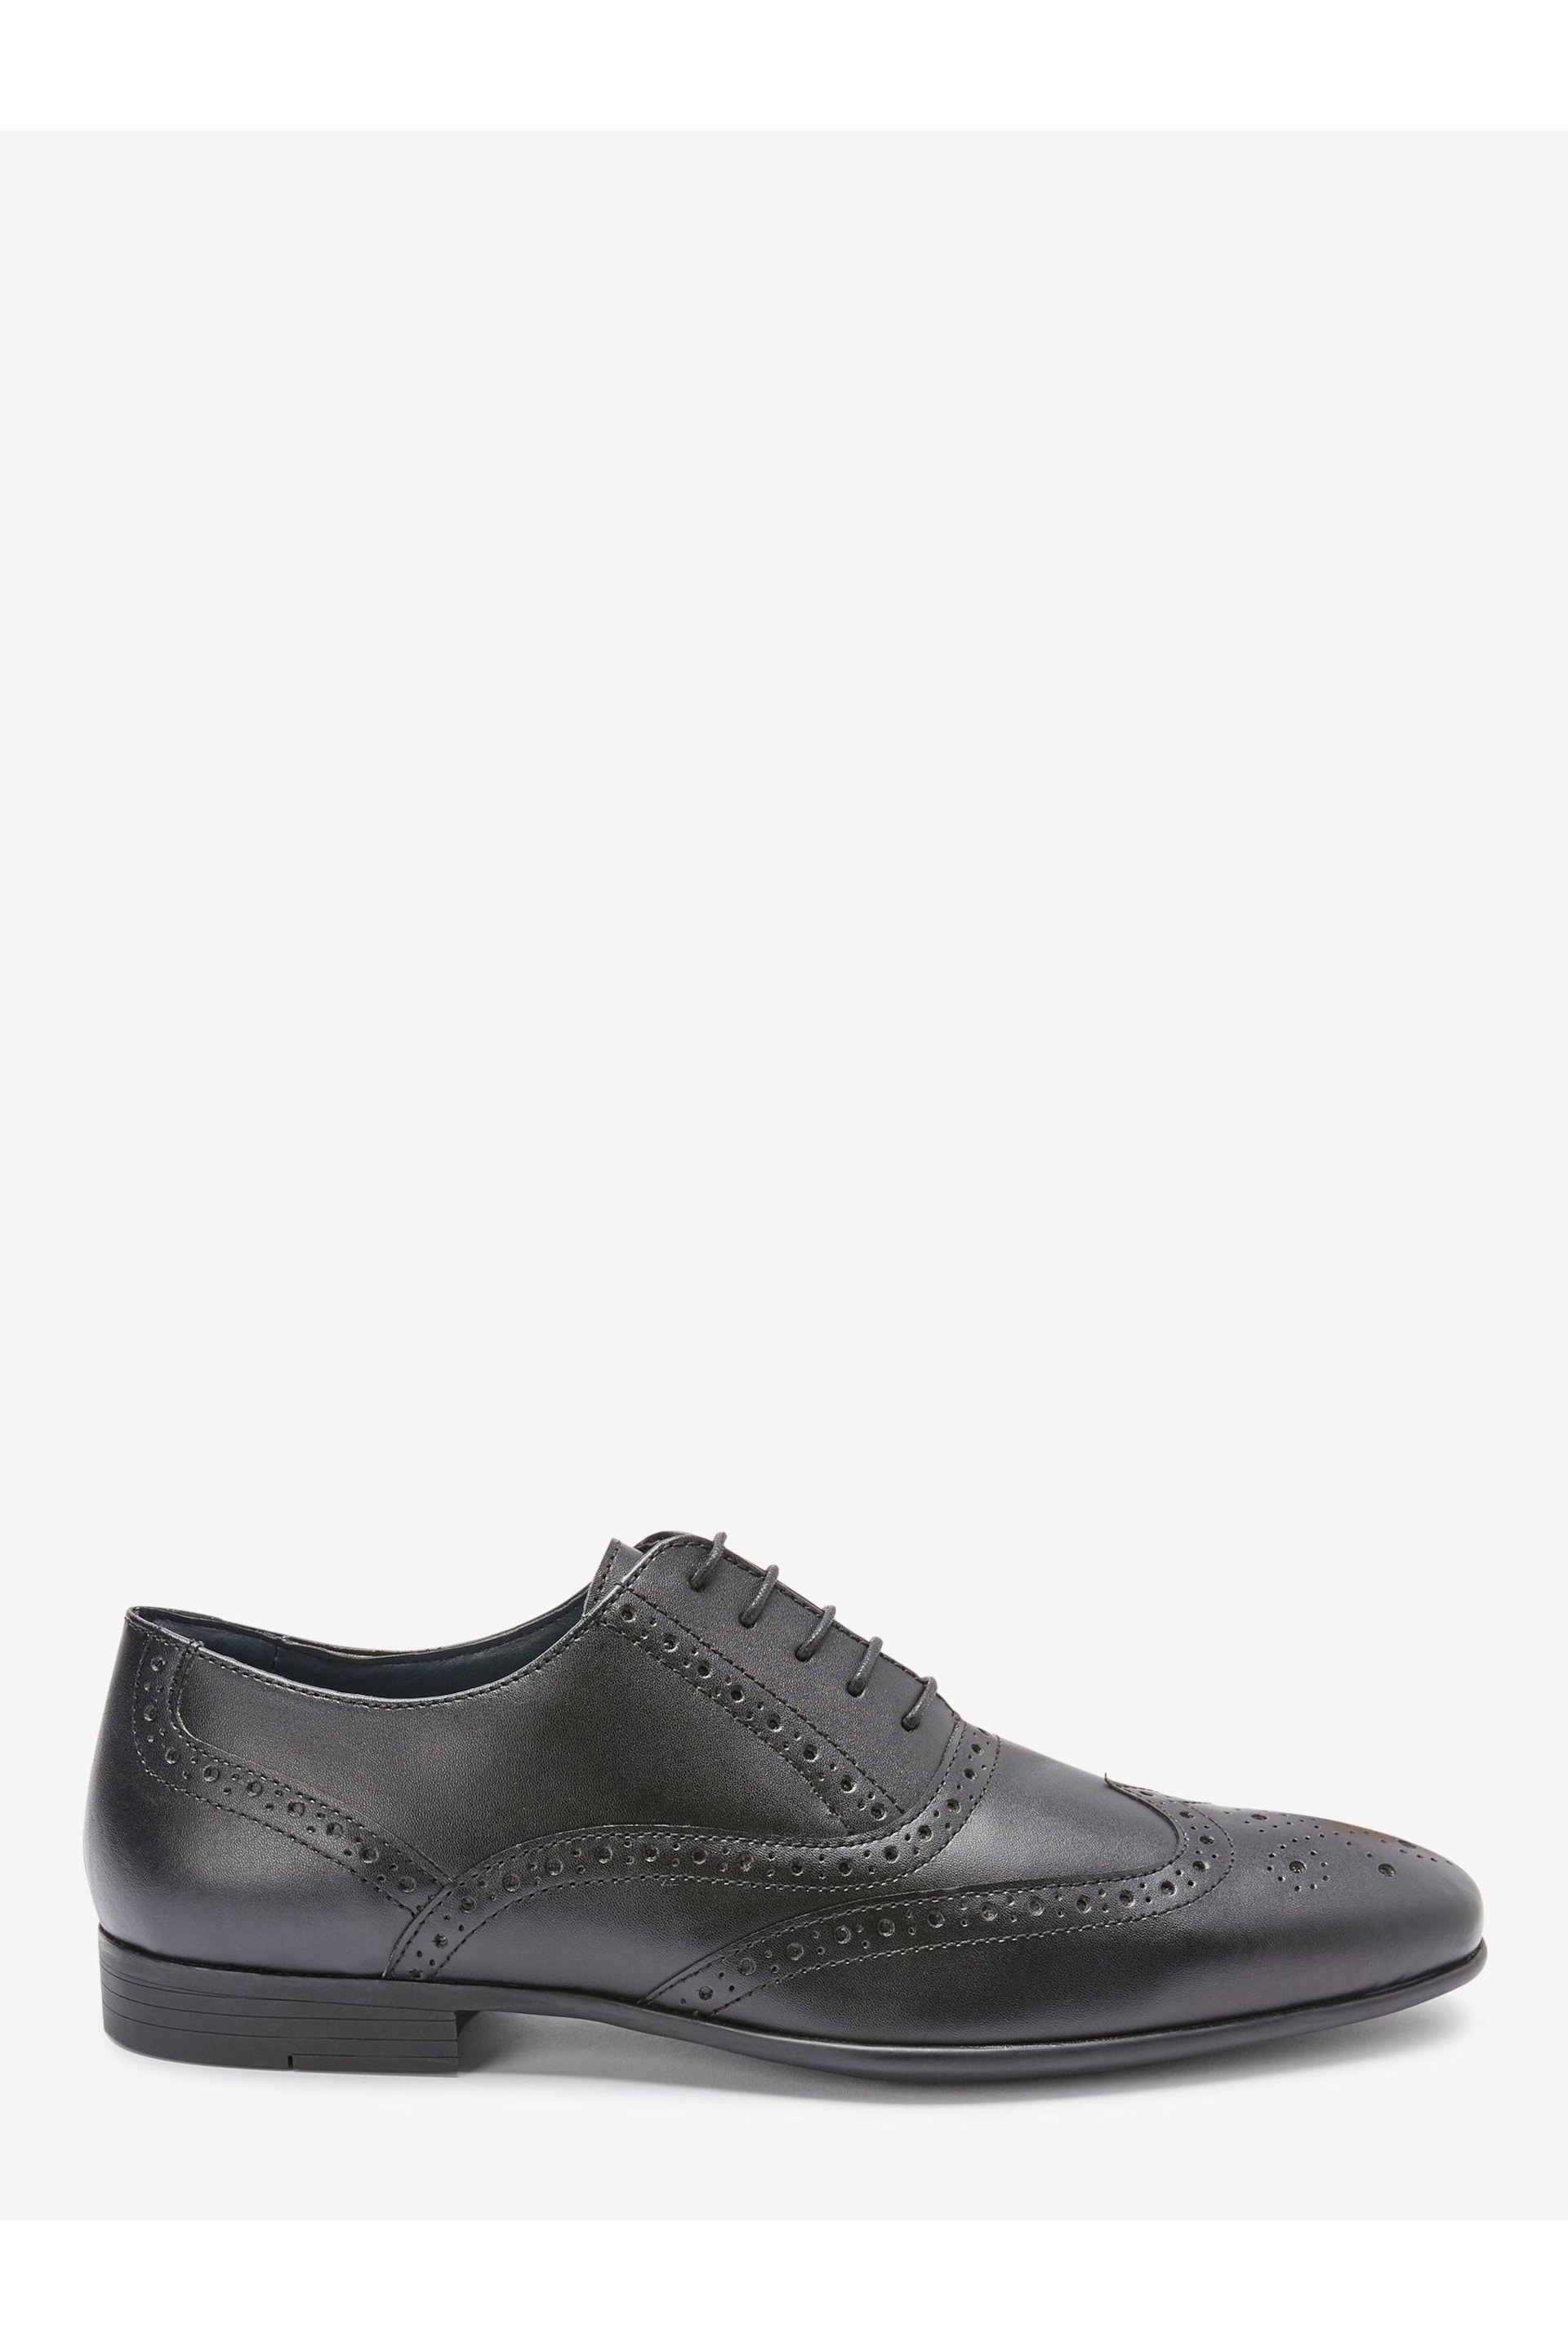 Black Wide Fit Leather Oxford Brogue Shoes - Image 1 of 6